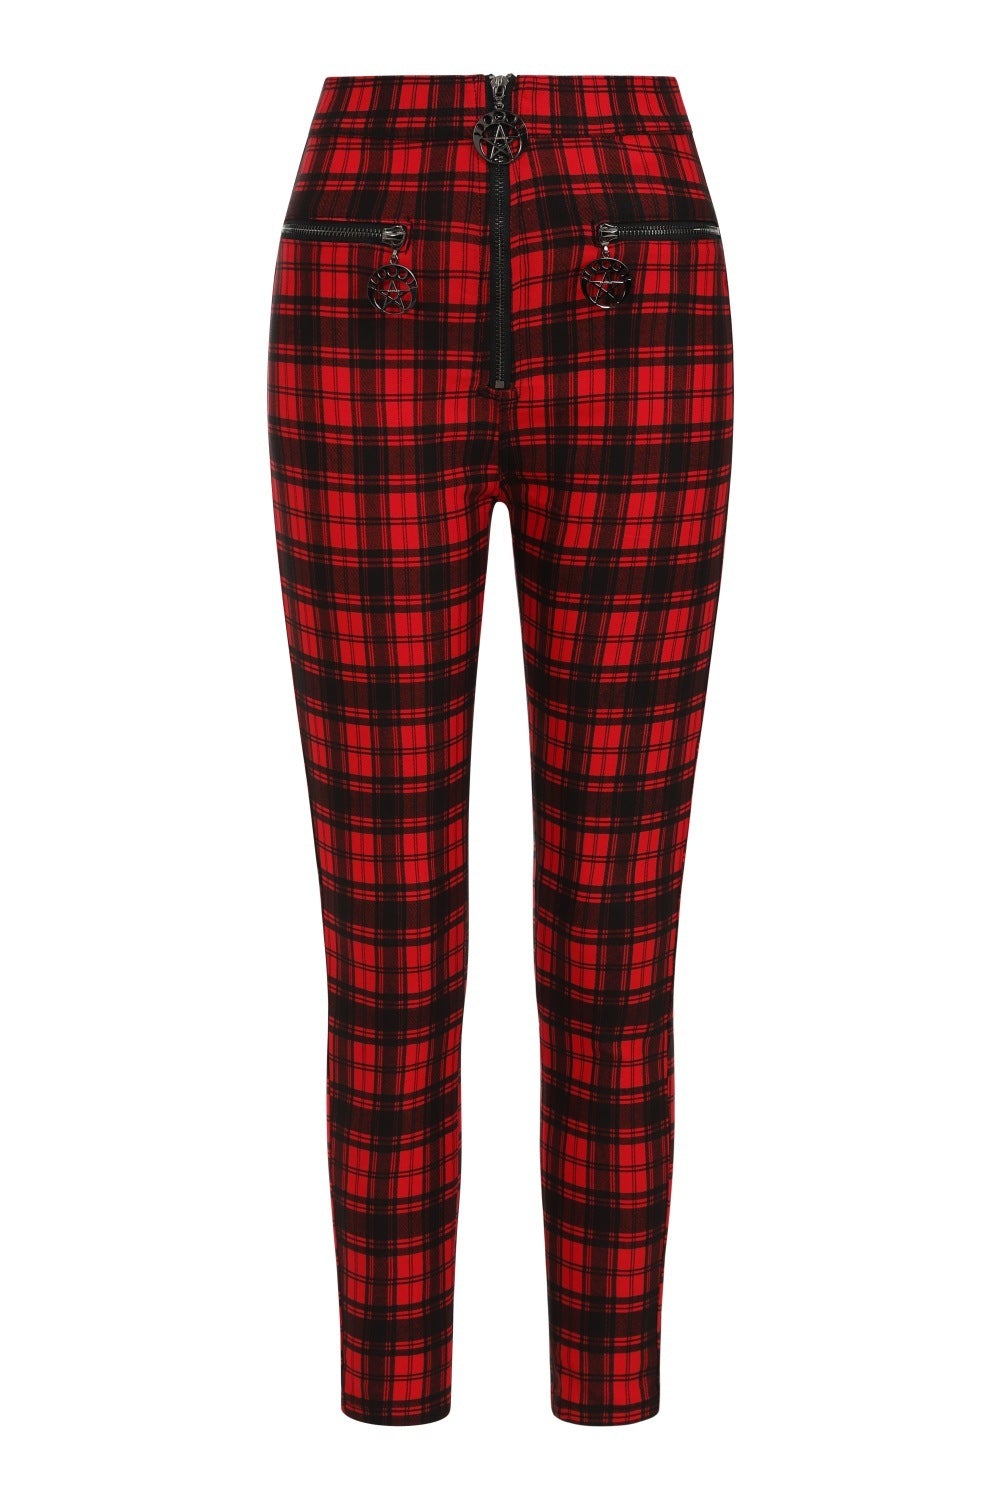 High waisted red check trousers with pentagram zip details. 